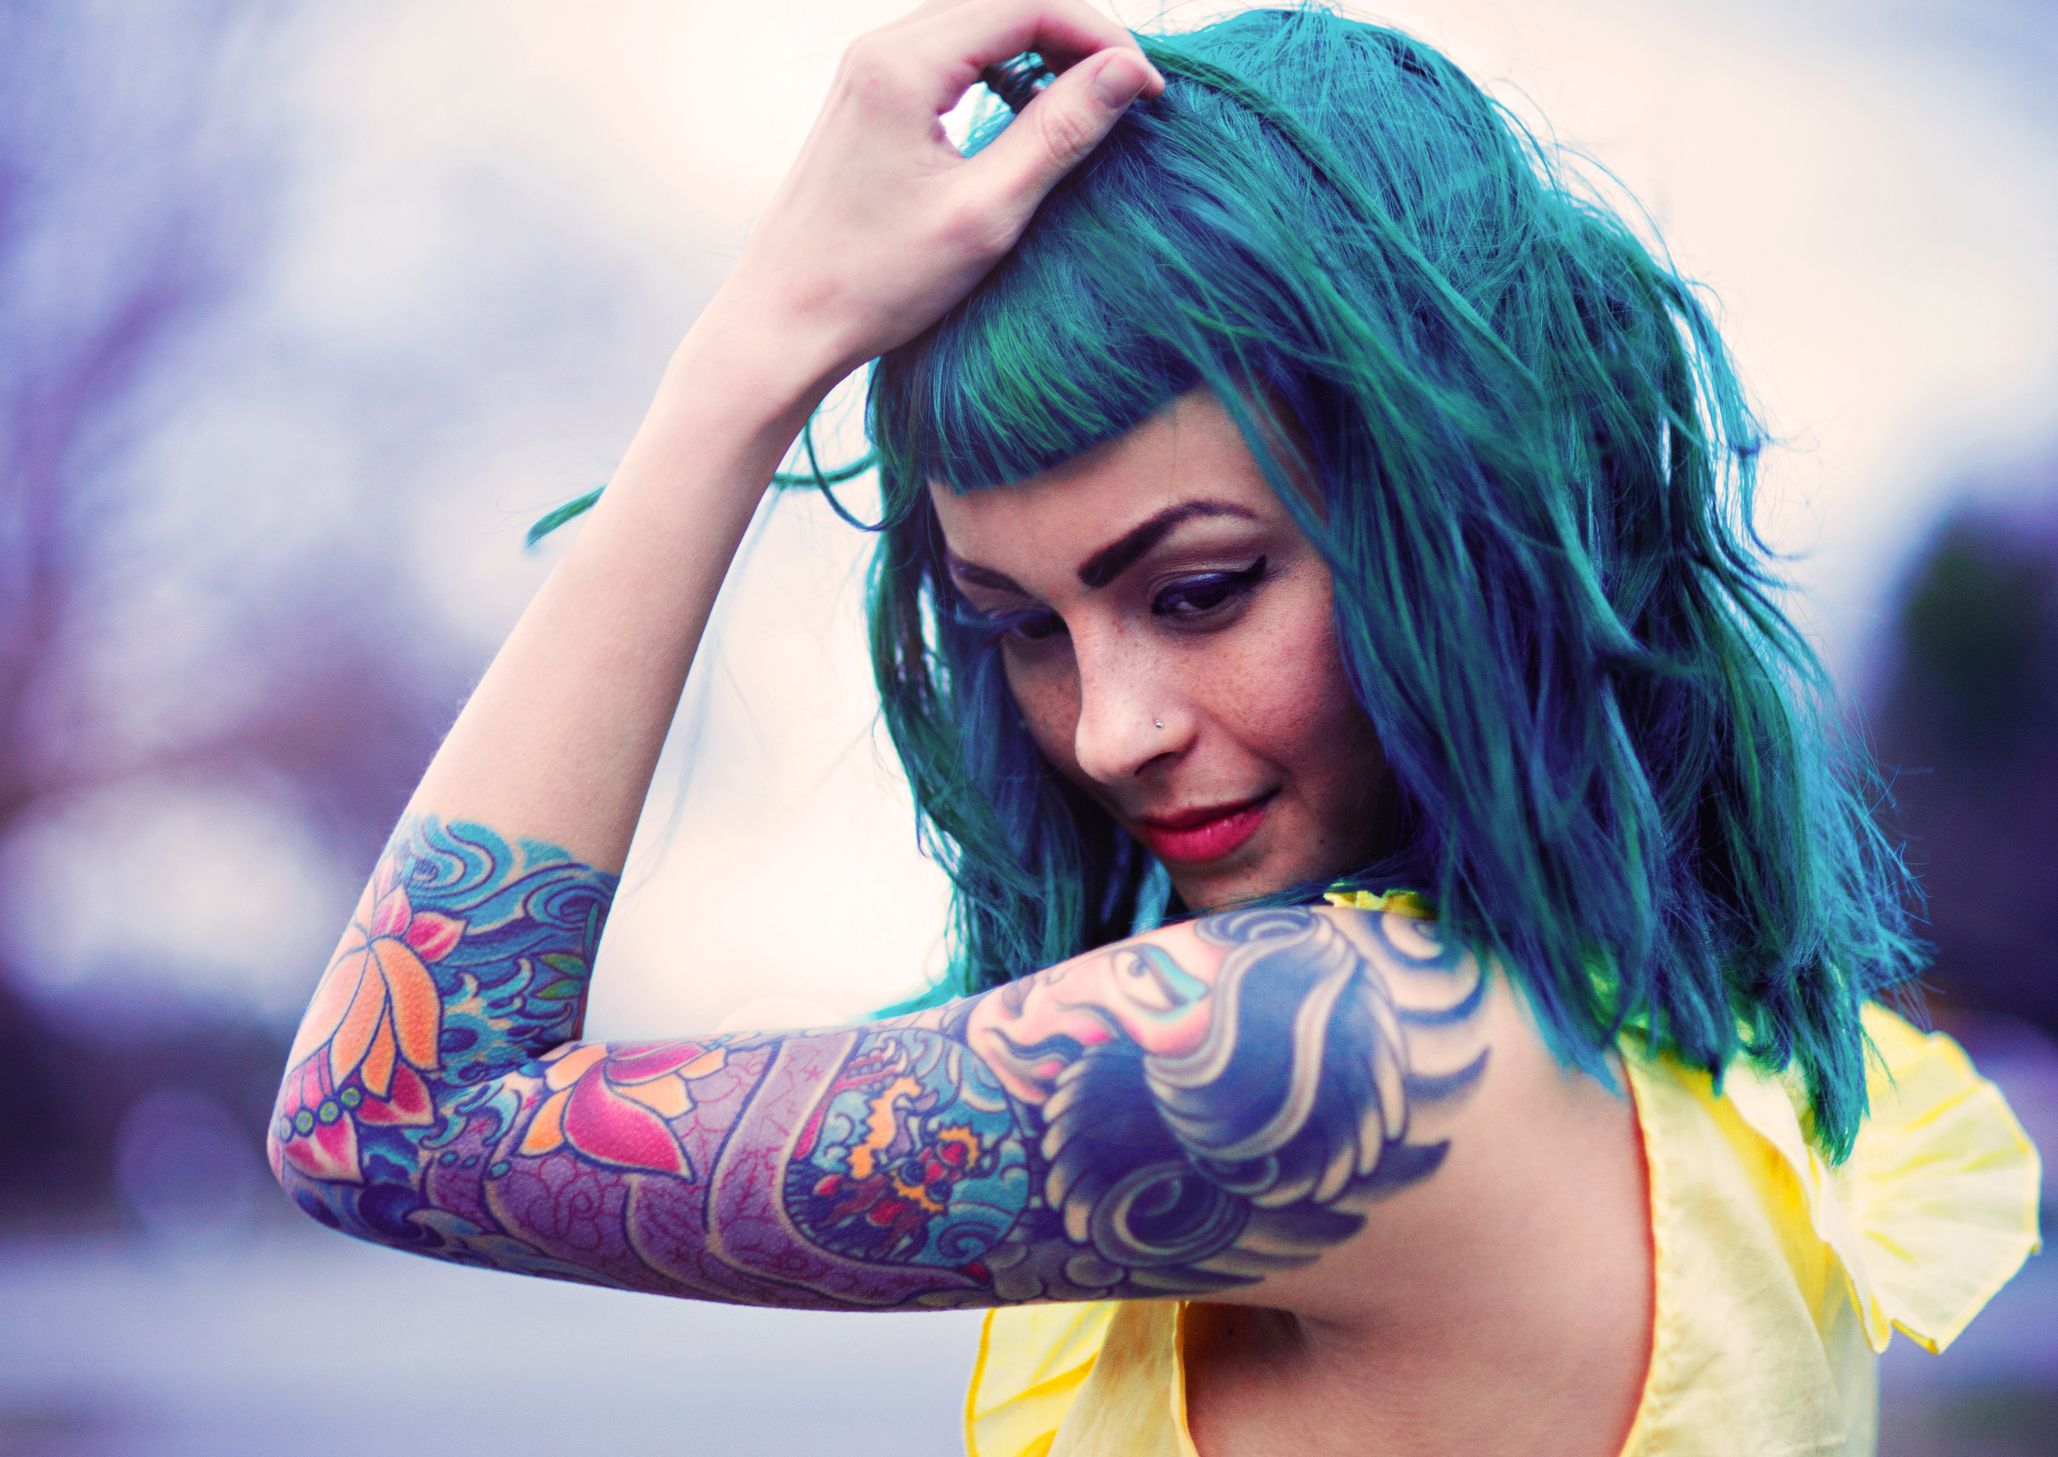 FDA Updates Safety Guidelines on Tattoos - How to Get a Safe Tattoo